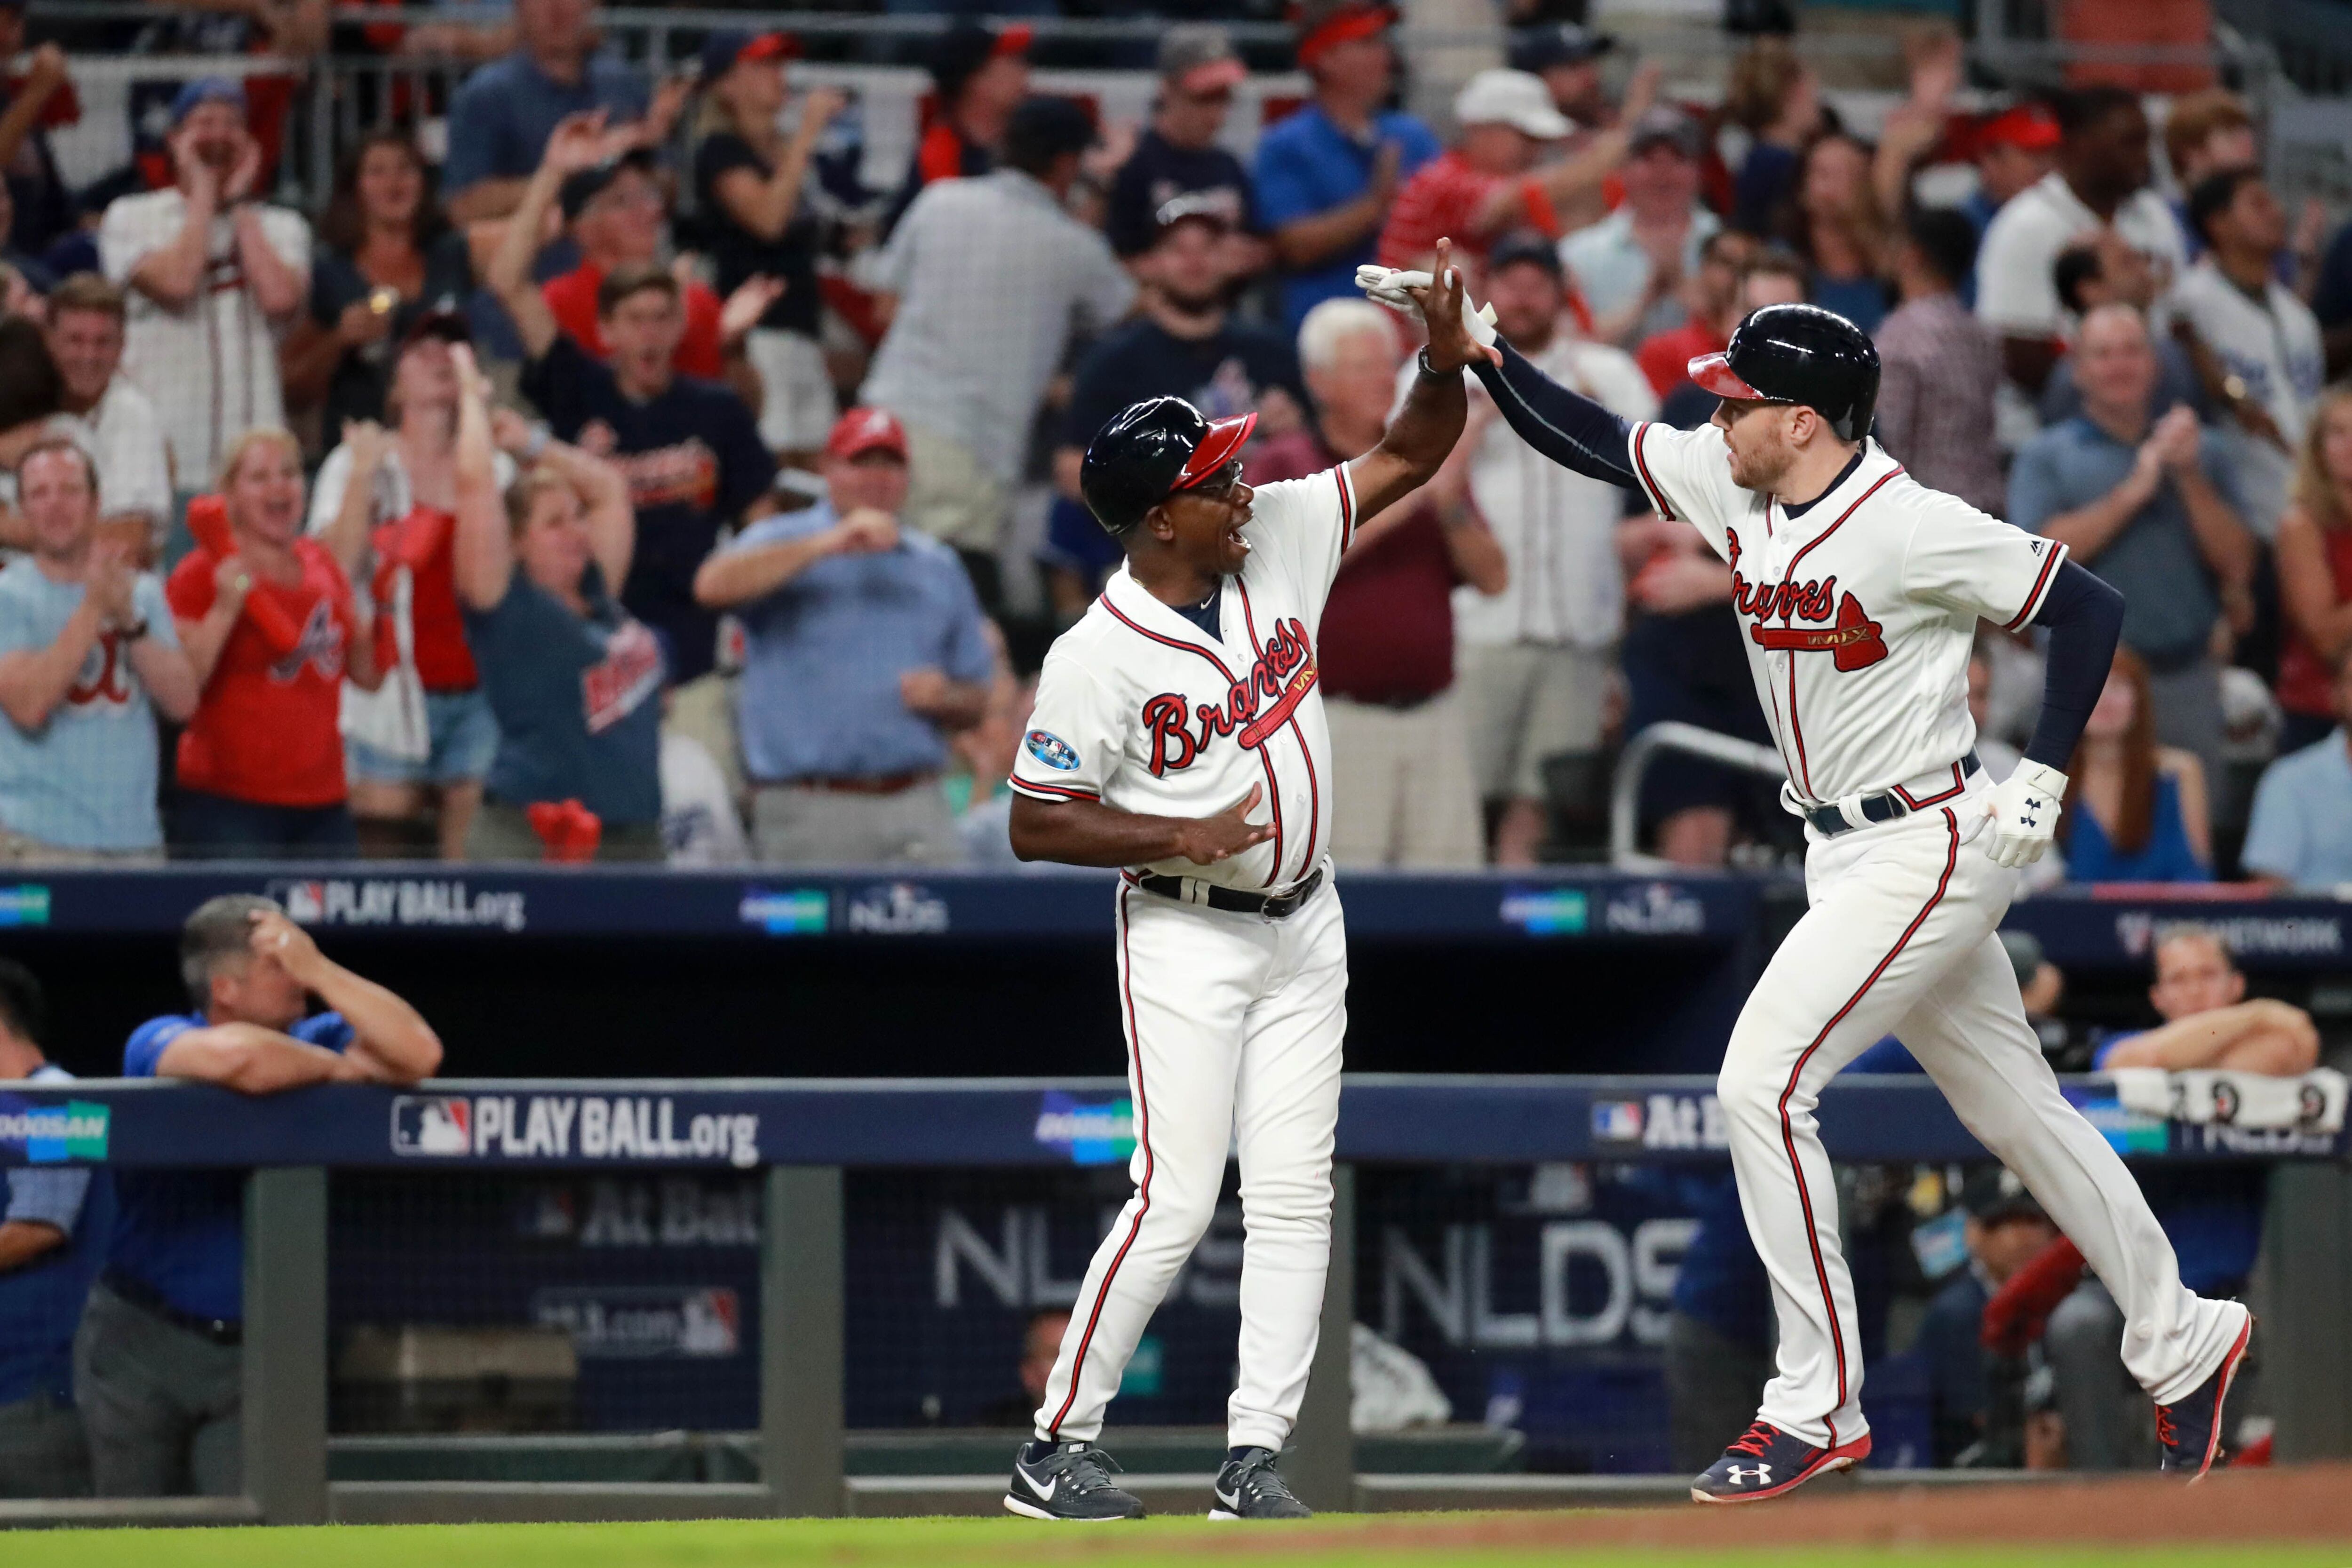 Fred-die!' does it: Freeman's homer lifts Braves over Dodgers in